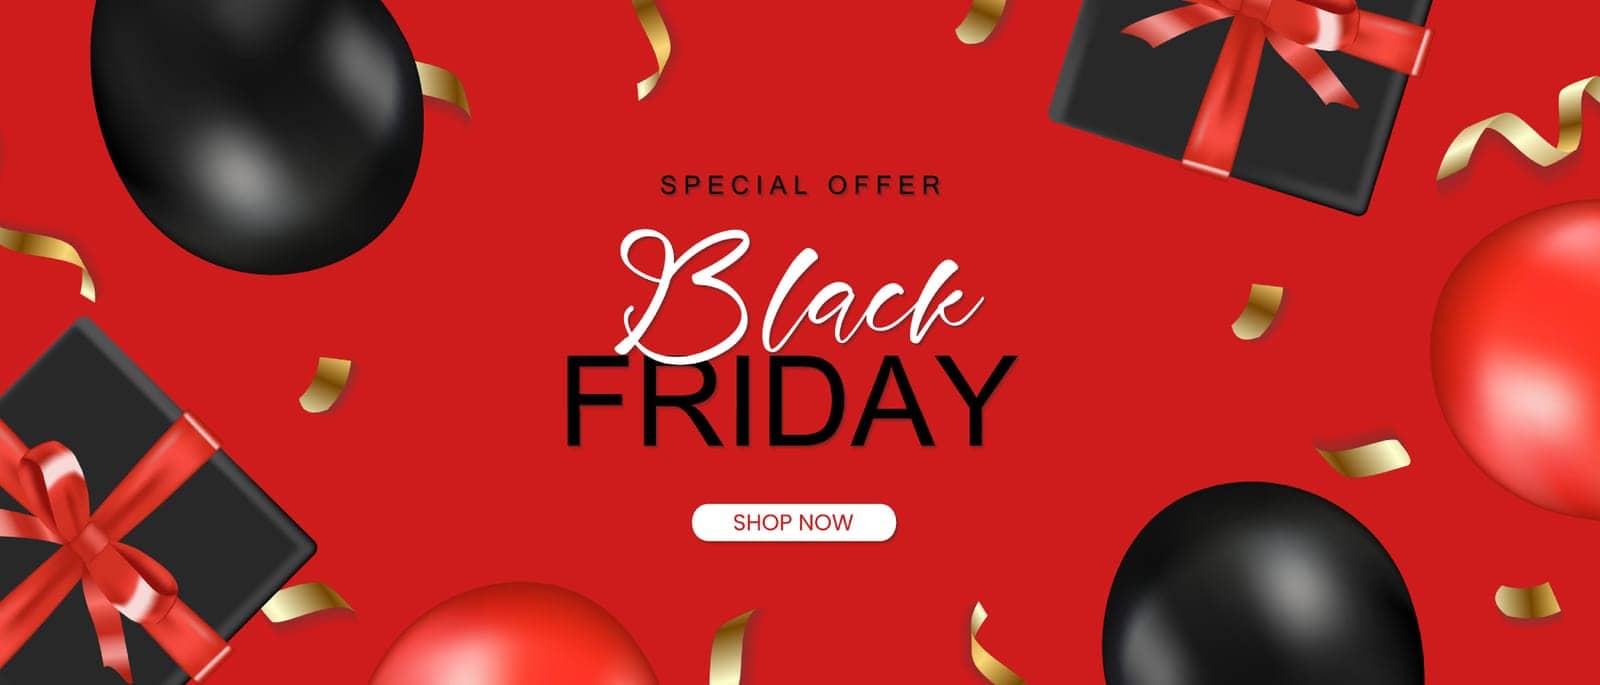 Black friday horizontal sale banner with realistic glossy balloons, gift box and ribbon text on red background. Vector illustration.